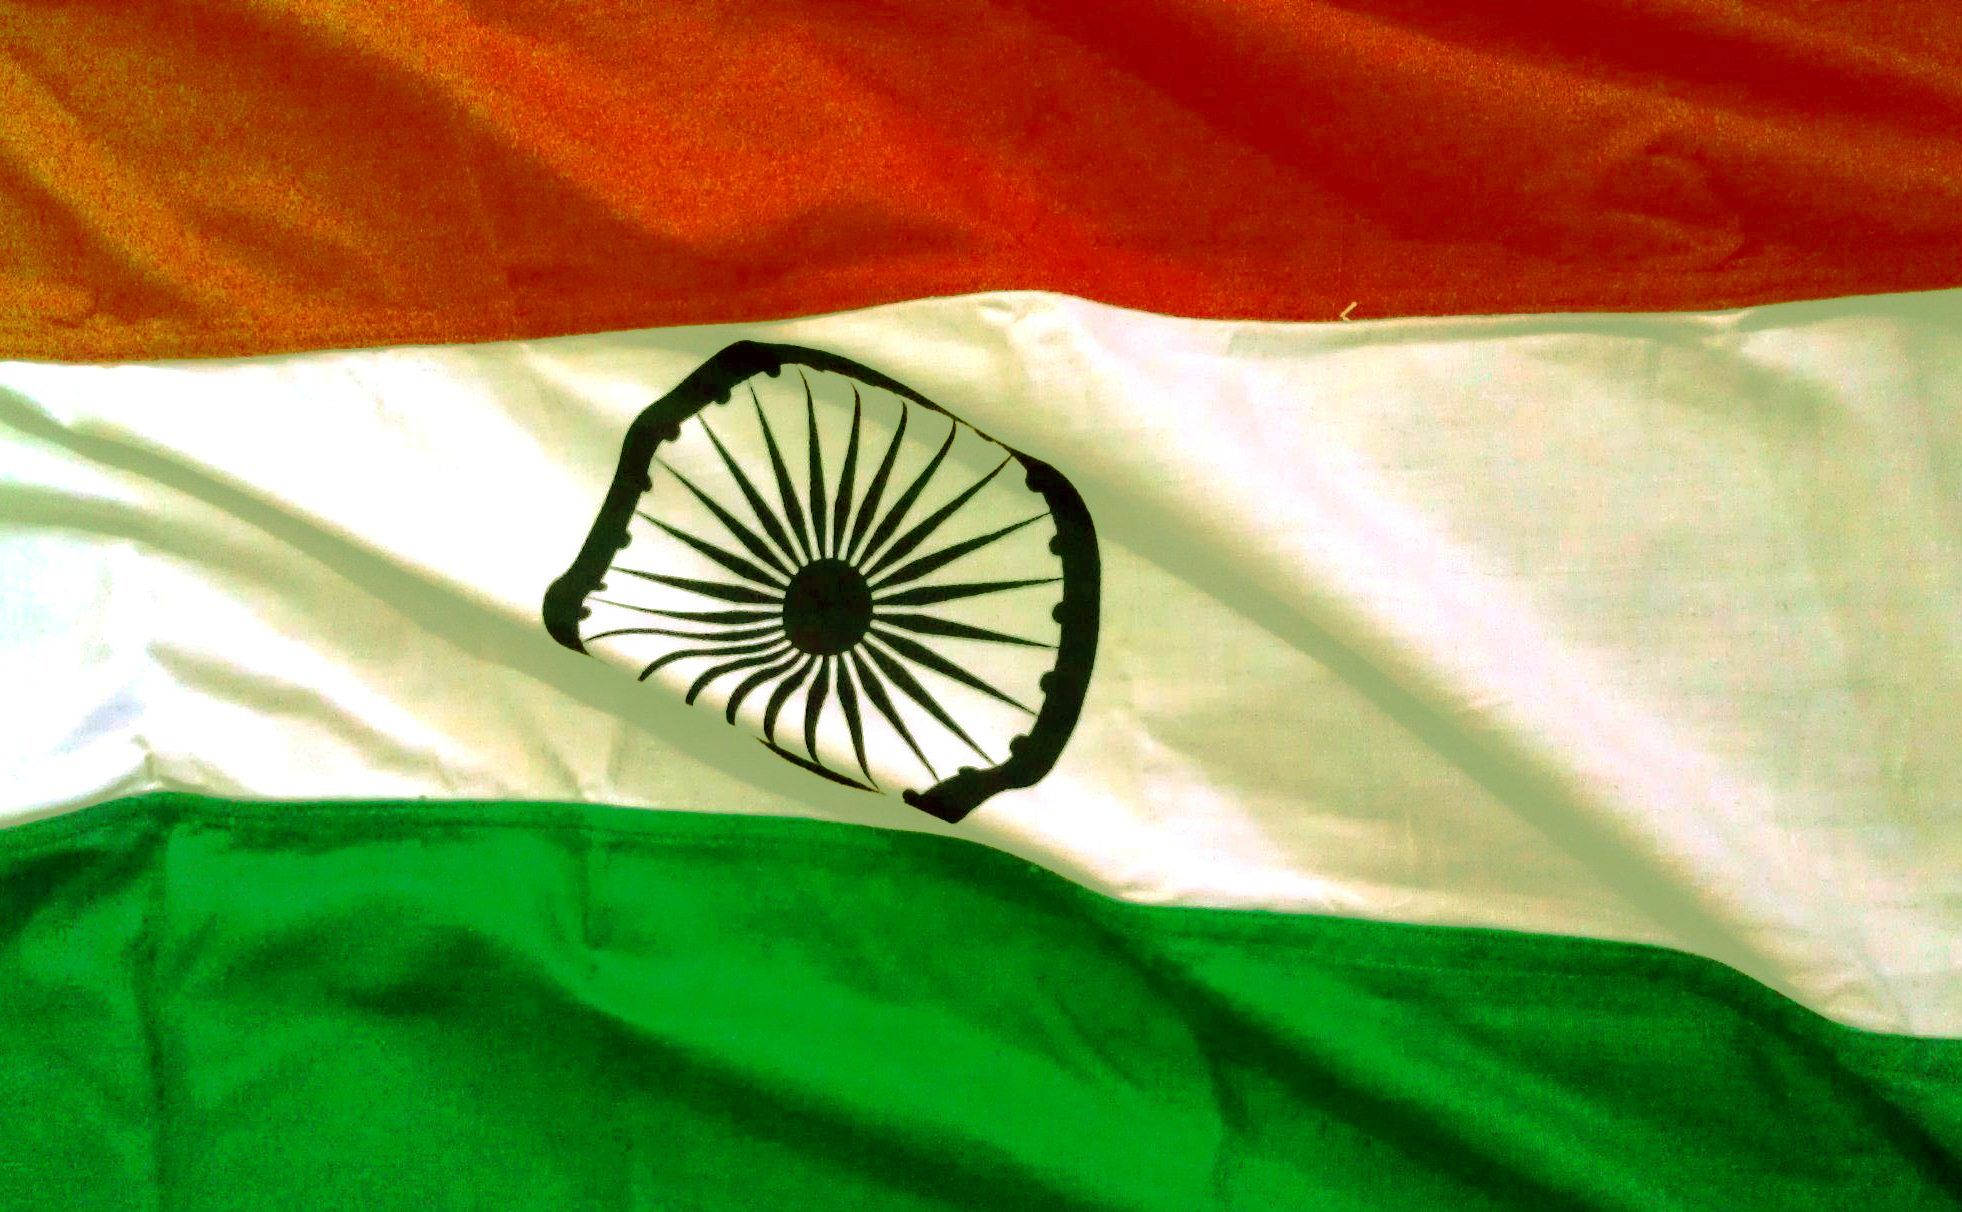 Indian Flags Wallpaper 94 For Desktop And Mobile - National Flag Of India Hd - HD Wallpaper 